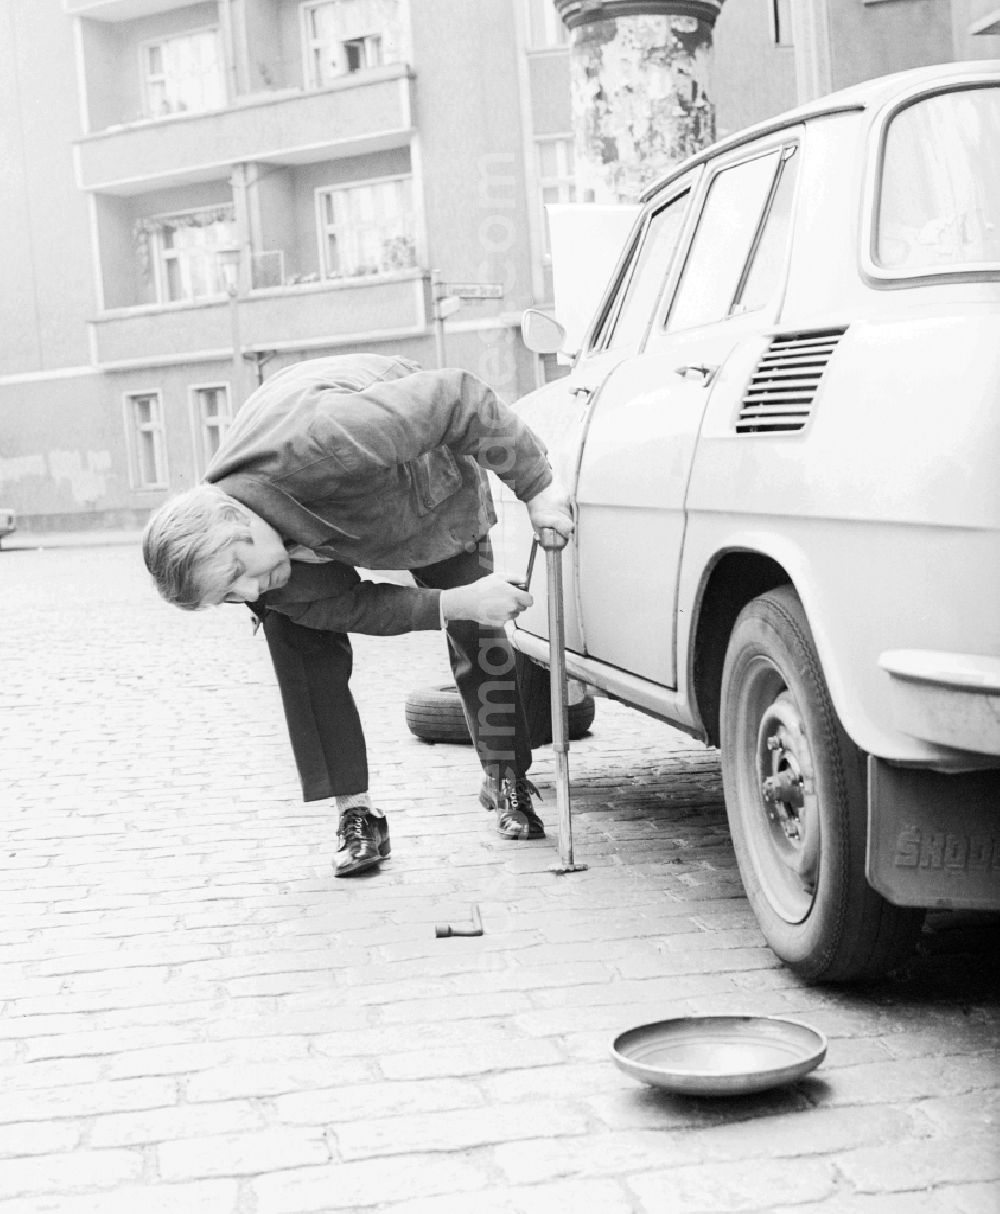 GDR photo archive: Berlin - The actor Peter Borgelt (1927-1994) repaired on the road his car in Berlin, the former capital of the GDR, German Democratic Republic